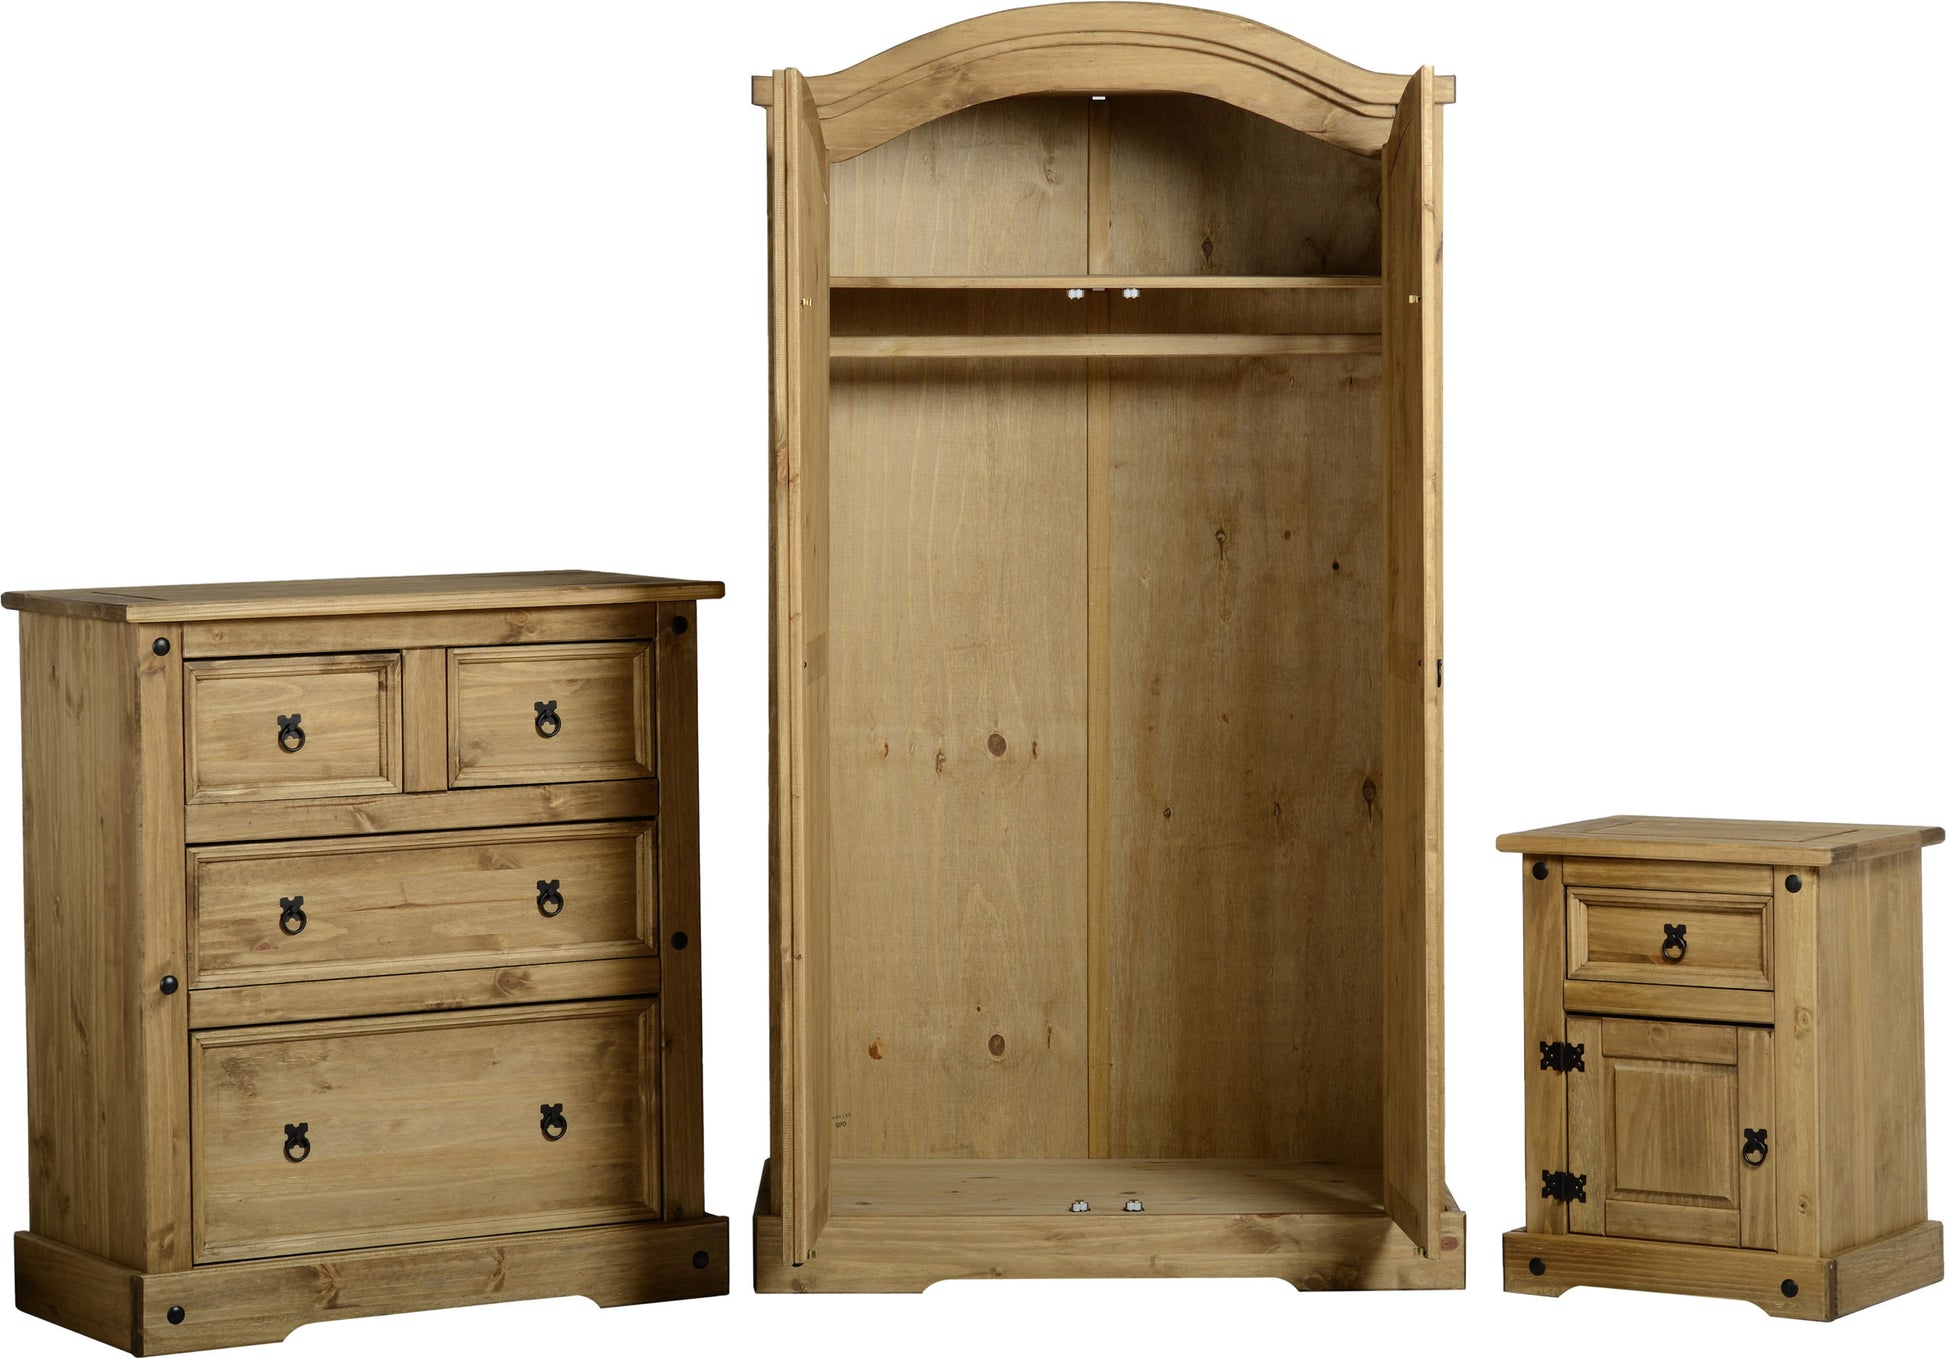 The Corona Trio Bedside Locker, Chest of Drawers, and Wardrobe Set